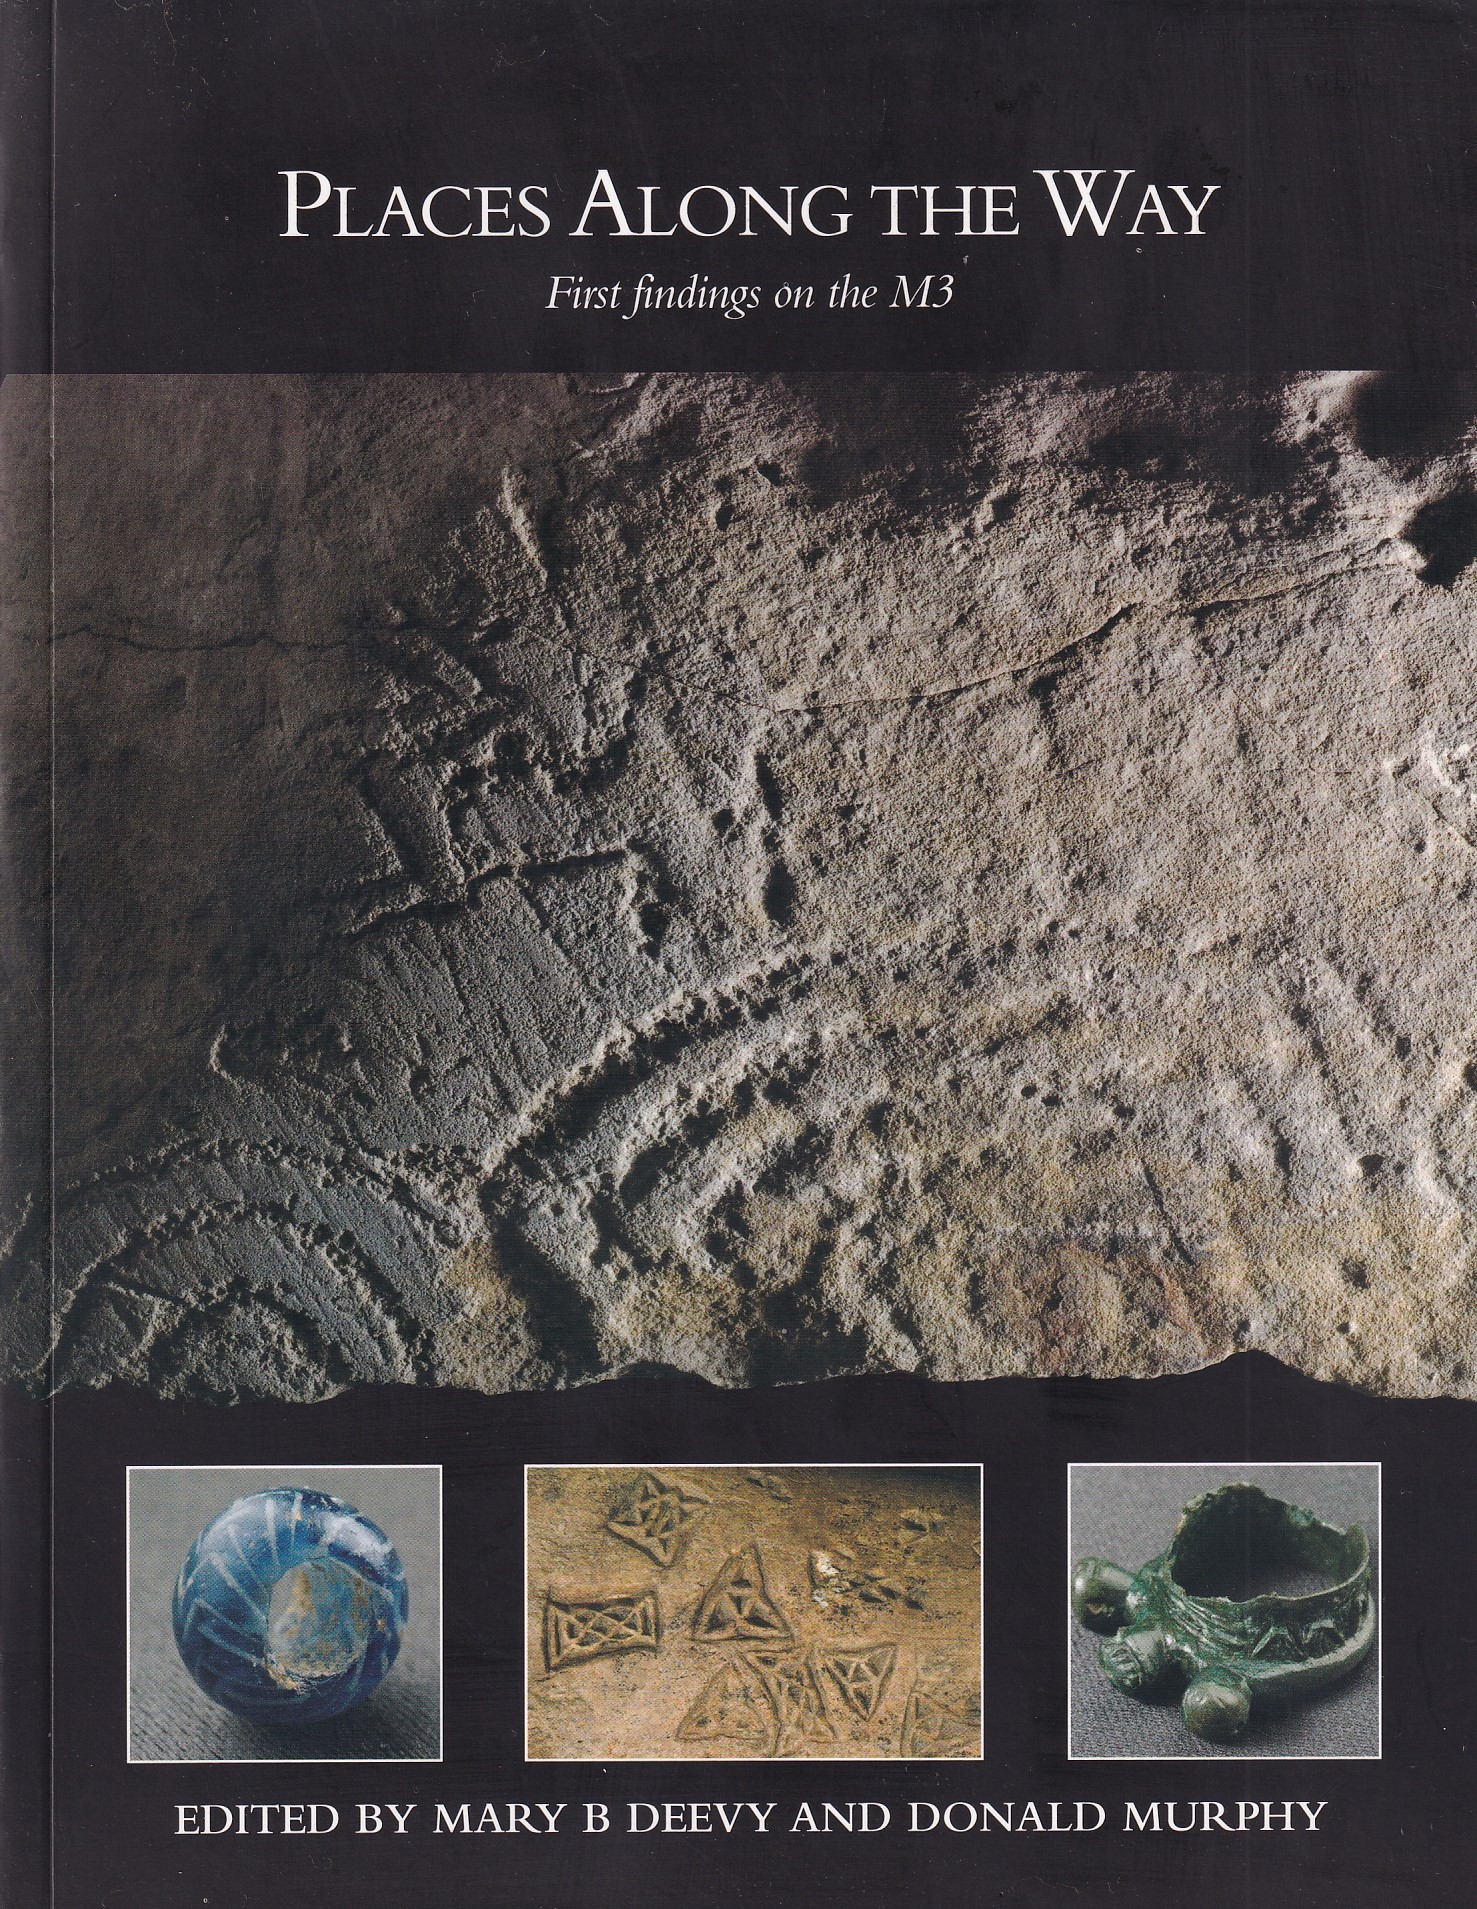 Places Along the Way: First Findings on the M3 by Mary B Deevy & Donald Murphy (eds.)